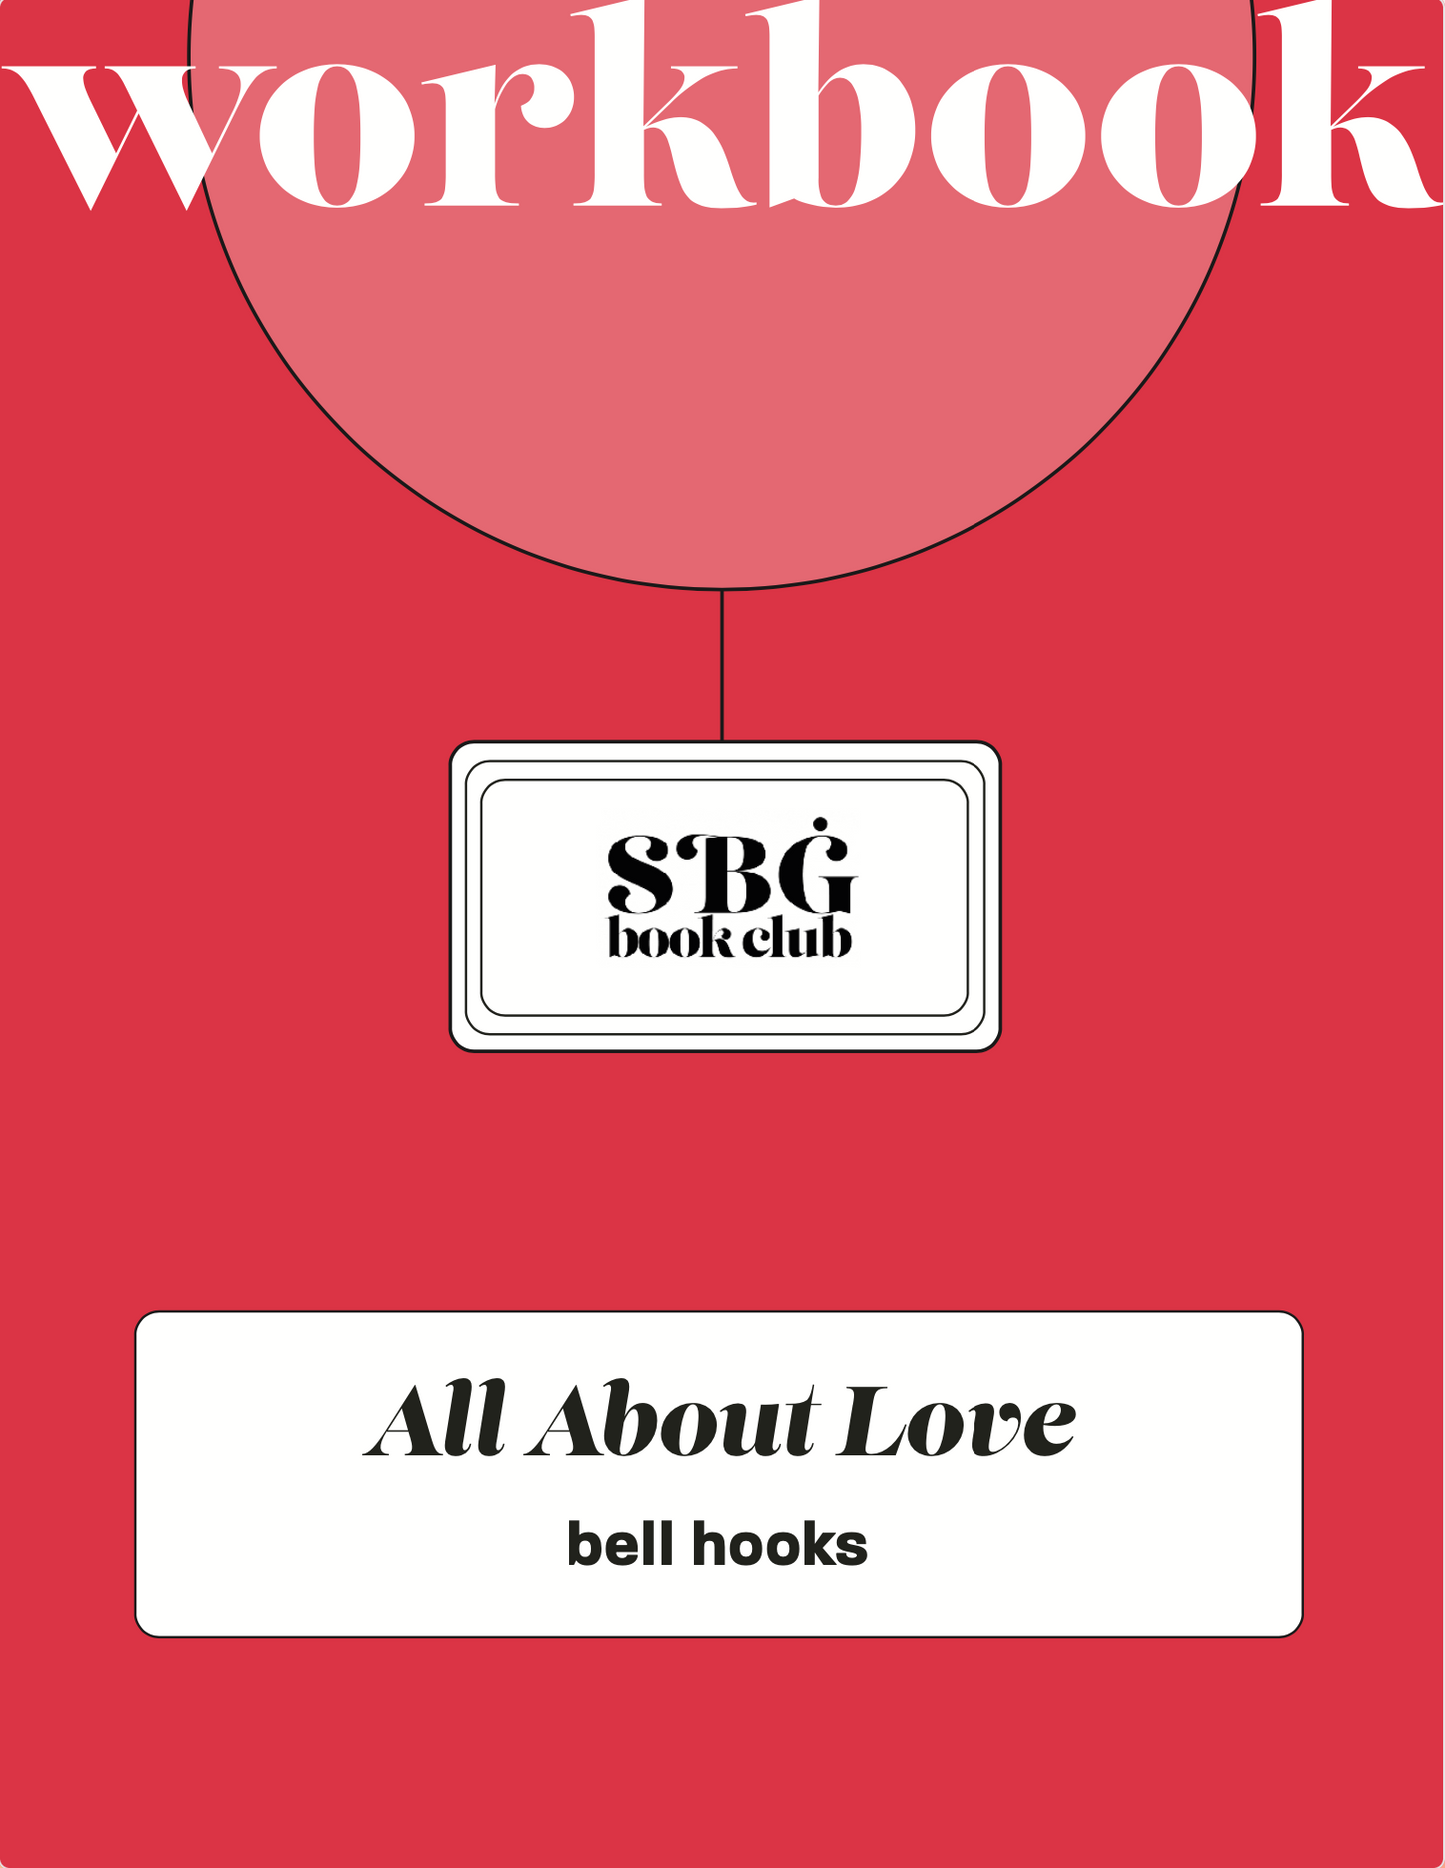 All About Love Workbook